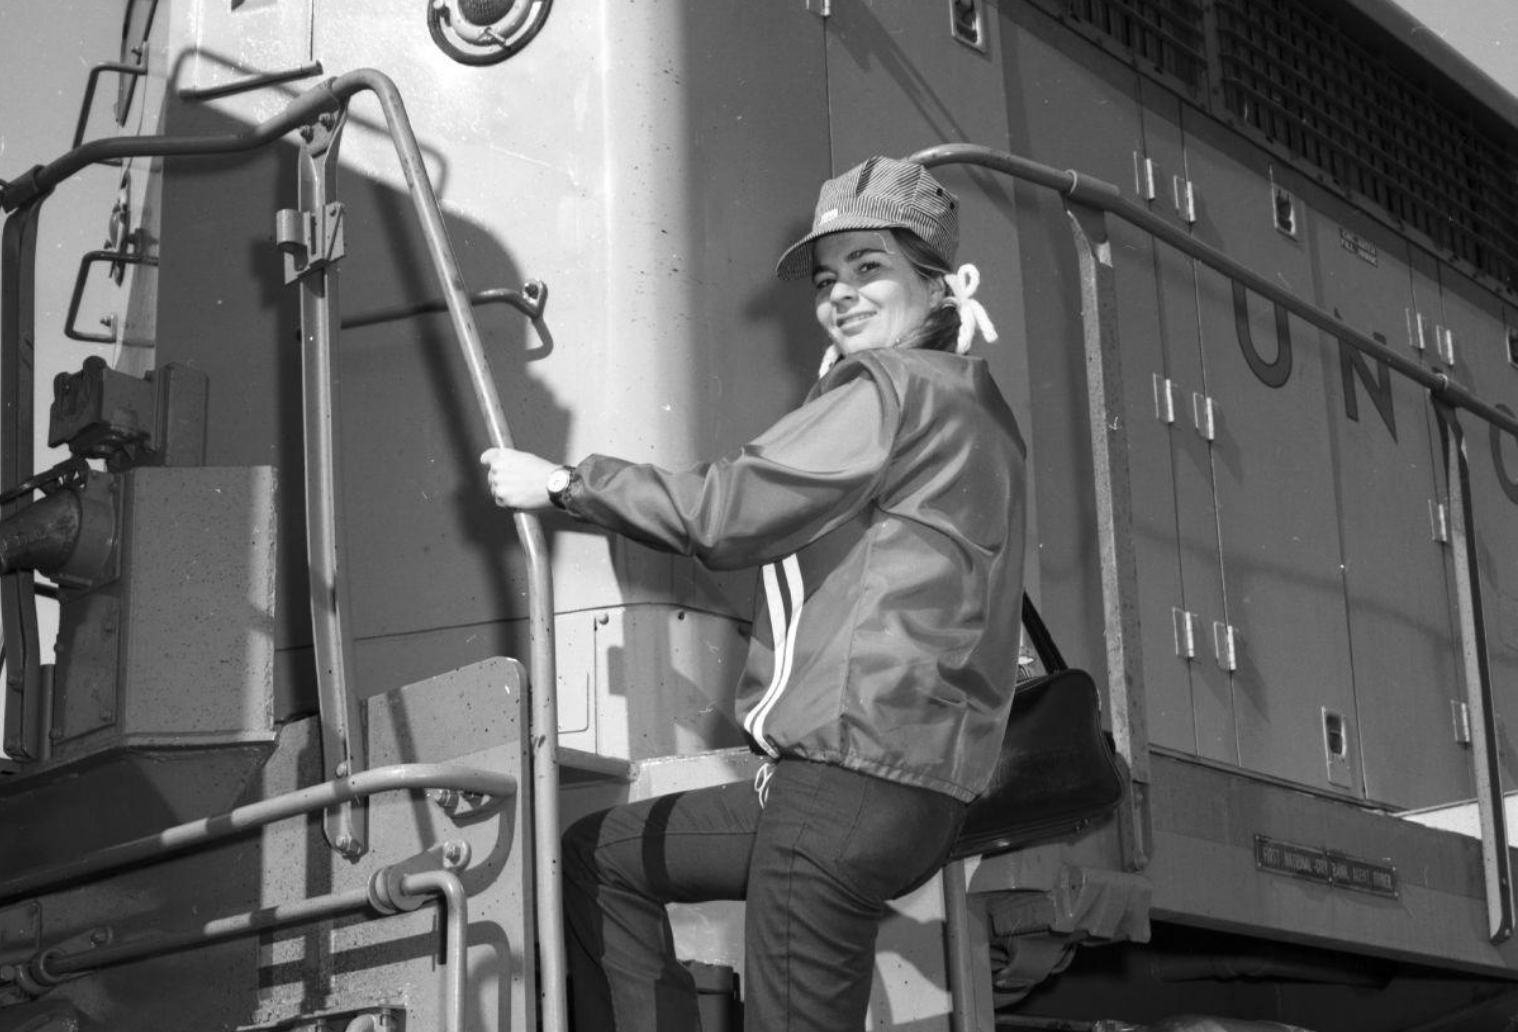 In 1974, Bonnie Leake shattered the glass ceiling when she became the first woman accepted by Union Pacific Railroad to train as a locomotive engineer.